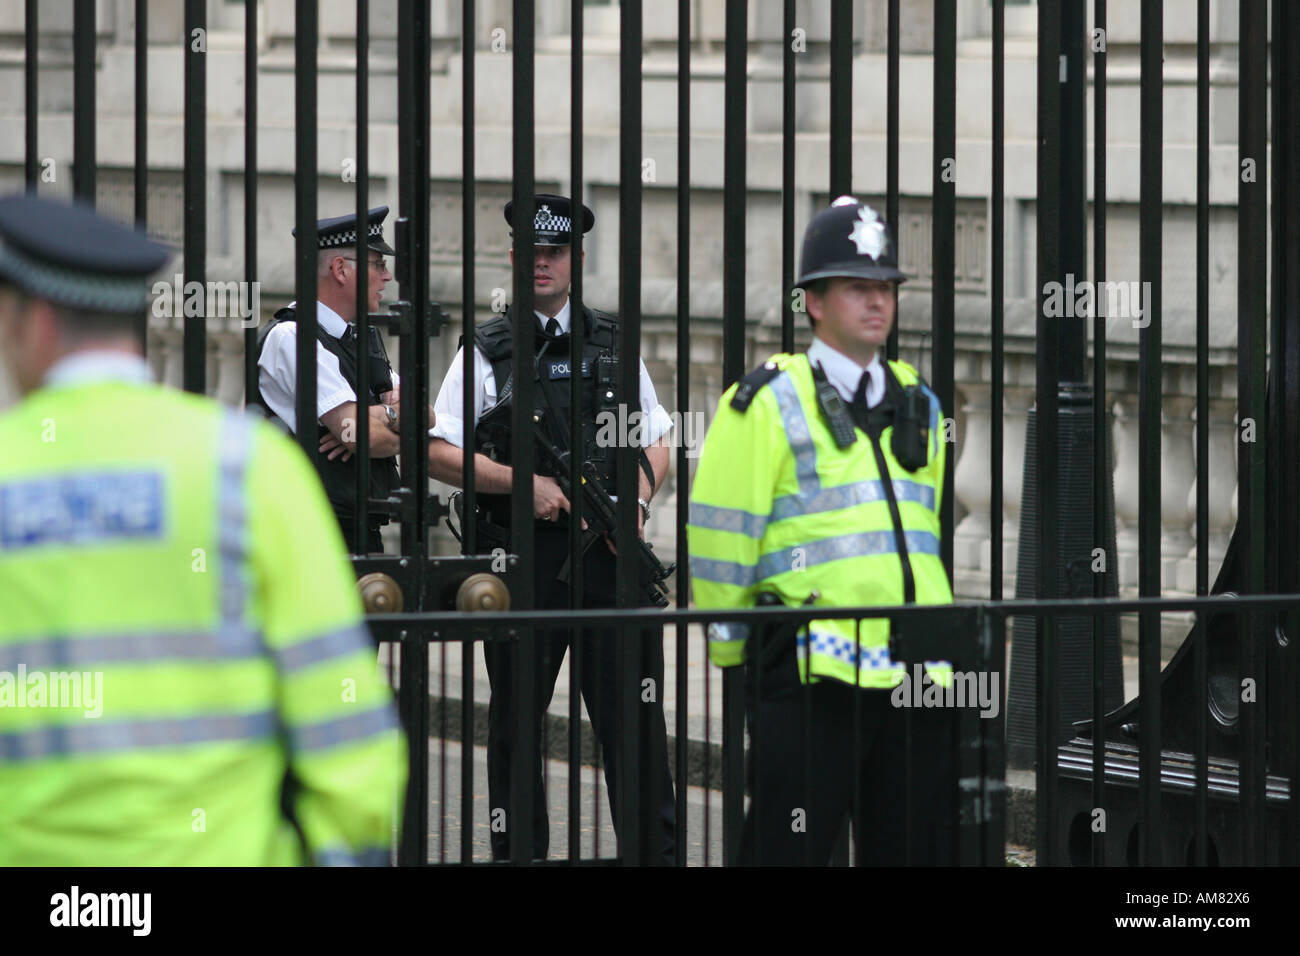 Police officers guarding the gates at Downing Street in London UK Stock Photo